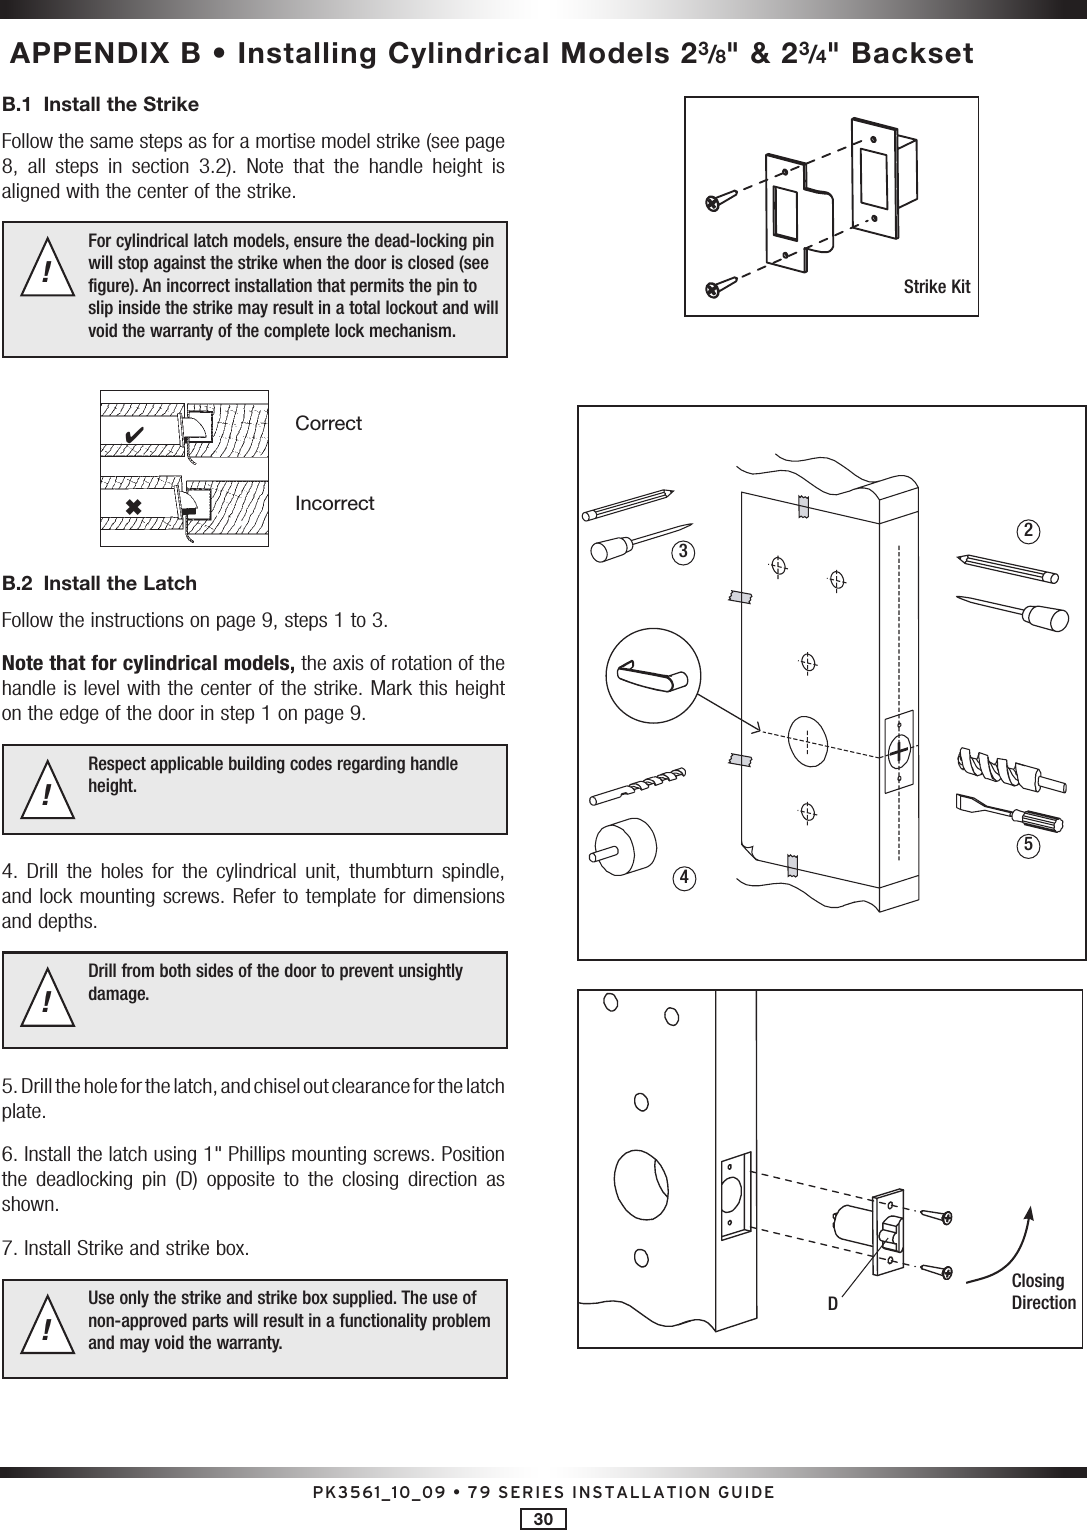 PK3561_10_09 • 79 SERIES INSTALLATION GUIDE30 APPENDIX B • Installing Cylindrical Models 23/8&quot; &amp; 23/4&quot; BacksetB.1  Install the Strike Follow the same steps as for a mortise model strike (see page 8,  all  steps  in  section  3.2).  Note  that  the  handle  height  is aligned with the center of the strike.For cylindrical latch models, ensure the dead-locking pin will stop against the strike when the door is closed (see figure). An incorrect installation that permits the pin to slip inside the strike may result in a total lockout and will void the warranty of the complete lock mechanism.!CorrectIncorrect46B.2  Install the LatchFollow the instructions on page 9, steps 1 to 3.Note that for cylindrical models, the axis of rotation of the handle is level with the center of the strike. Mark this height on the edge of the door in step 1 on page 9.Respect applicable building codes regarding handle height.!4.  Drill  the  holes  for  the  cylindrical  unit, thumbturn  spindle, and lock mounting screws. Refer to template for dimensions and depths.Drill from both sides of the door to prevent unsightly damage.!5. Drill the hole for the latch, and chisel out clearance for the latch  plate.6. Install the latch using 1&quot; Phillips mounting screws. Position the  deadlocking  pin  (D)  opposite  to  the  closing  direction  as shown. 7. Install Strike and strike box.Use only the strike and strike box supplied. The use of non-approved parts will result in a functionality problem and may void the warranty.!Strike KitD2534Closing Direction